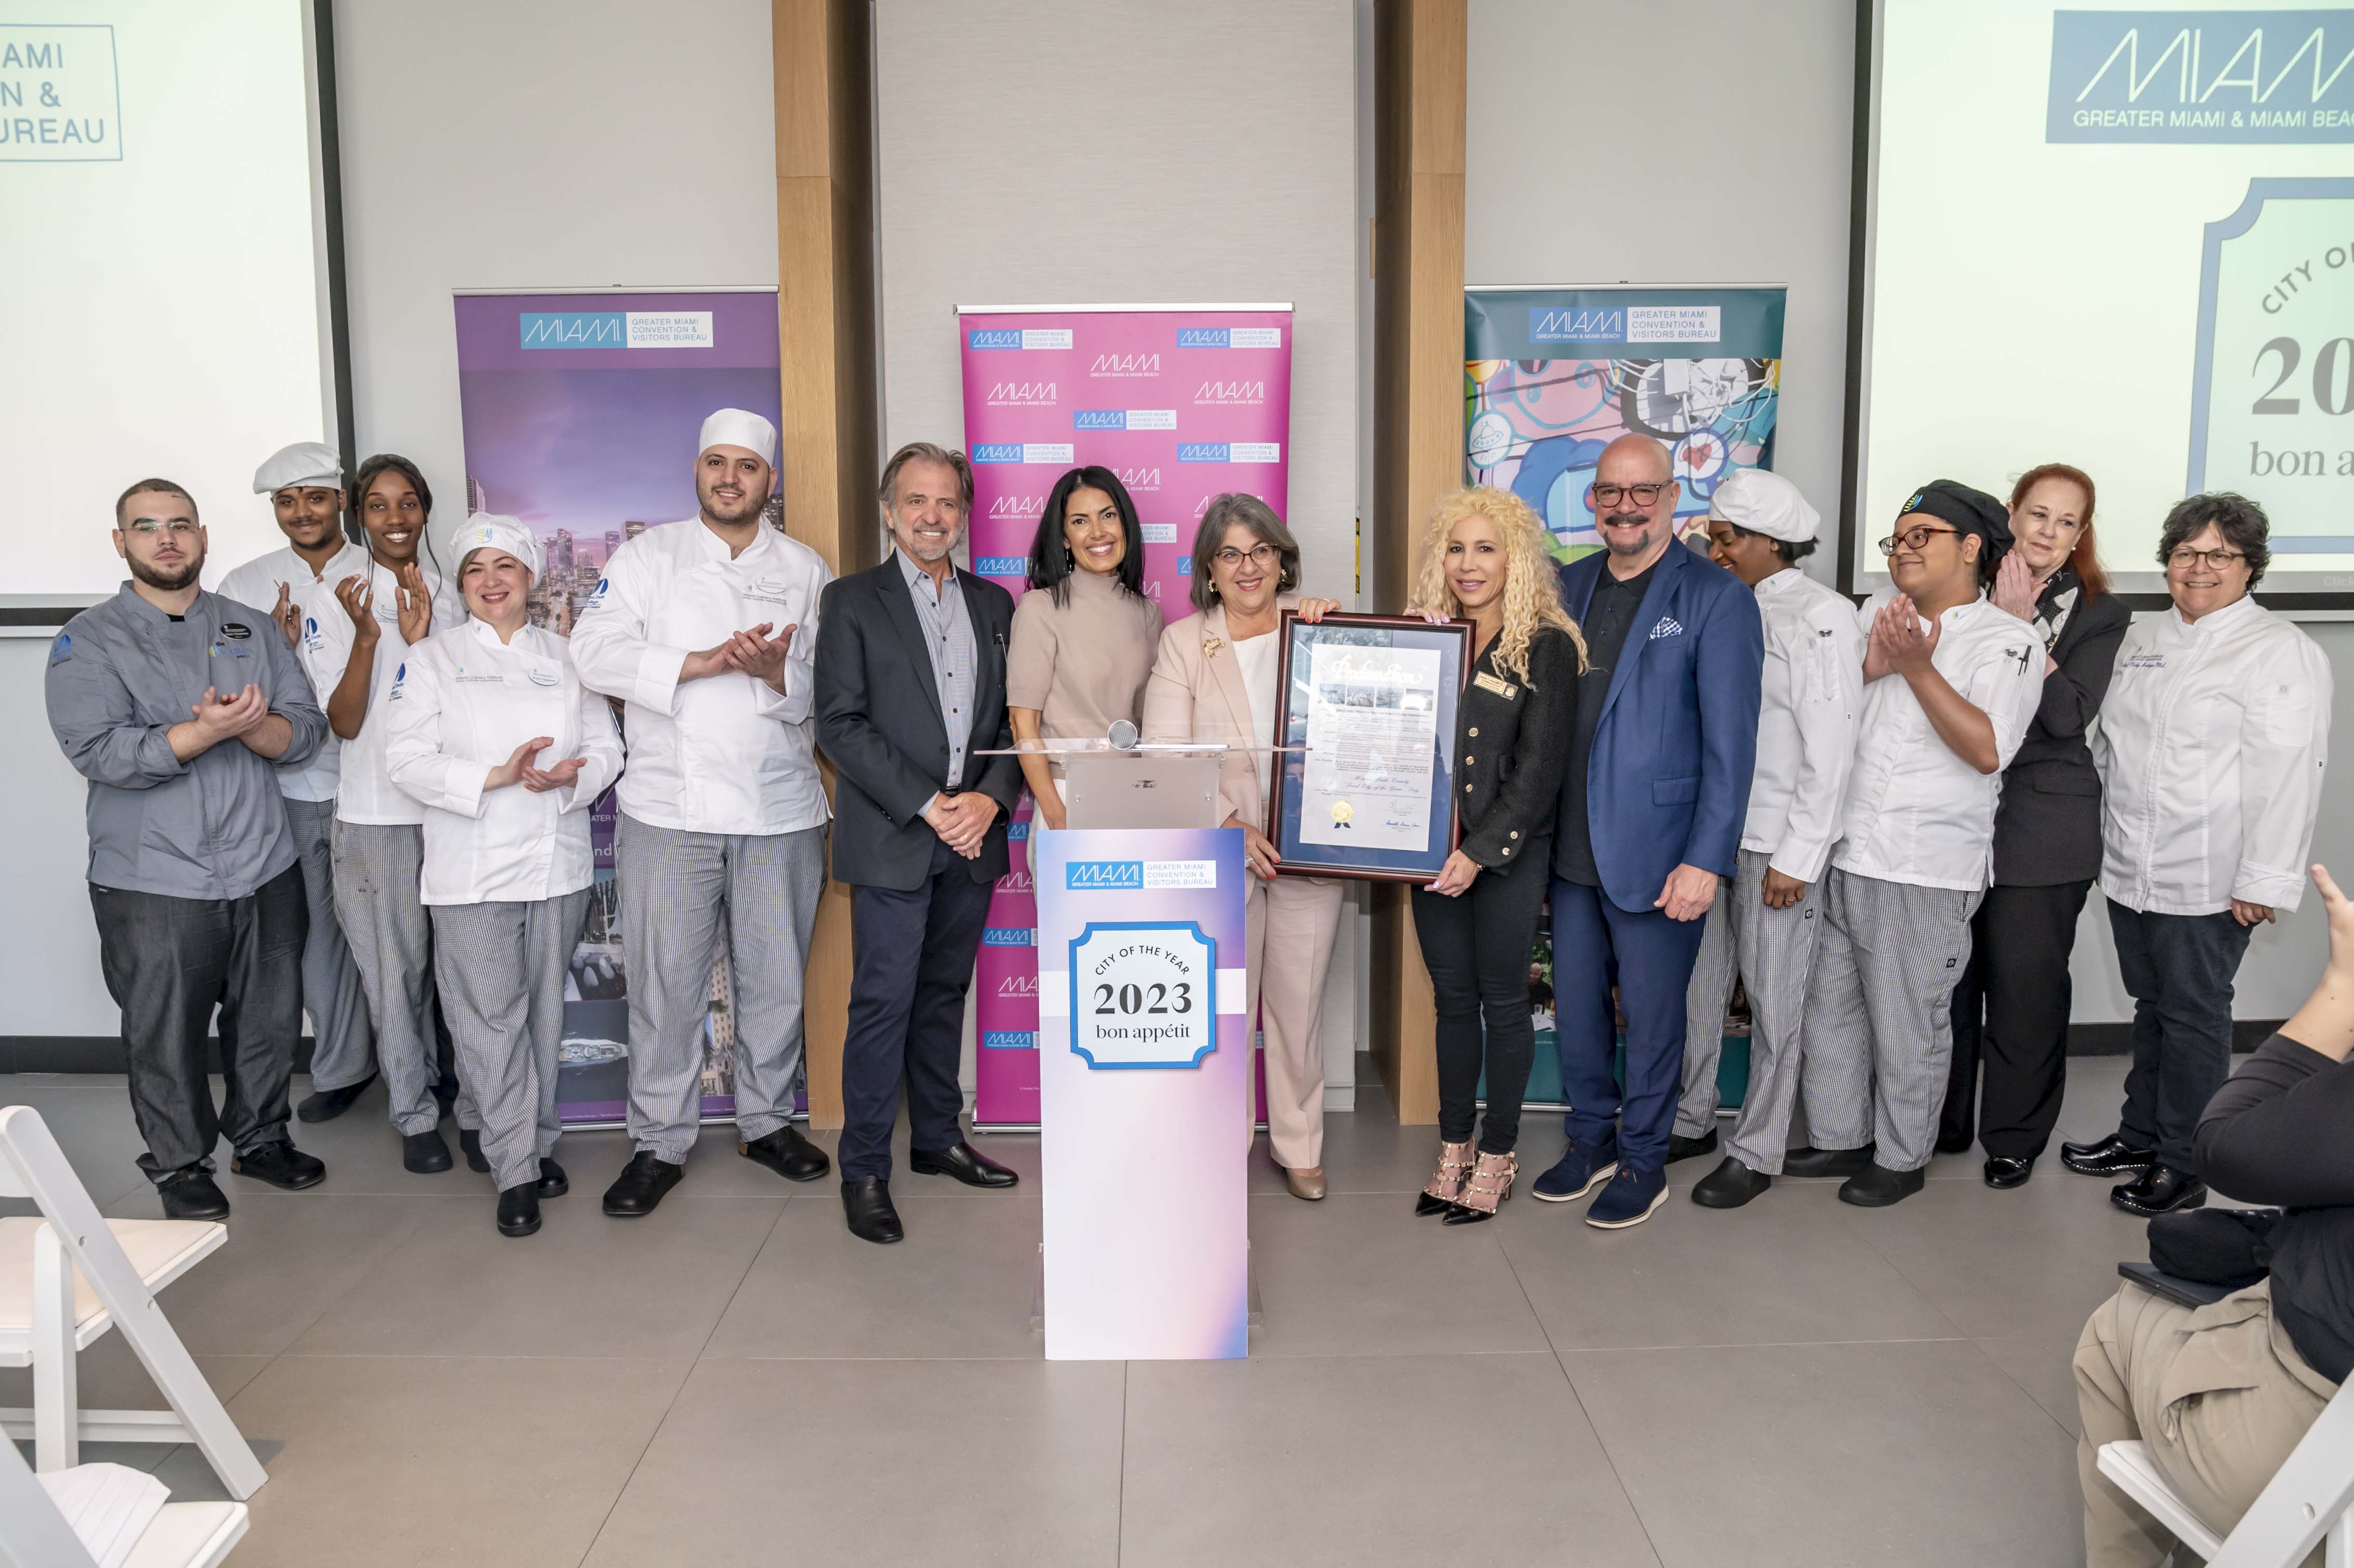 Miami-Dade County Mayor Daniella Levine Cava designated April 5 as “Food City of the Year Day” with official proclamation presented to David Whitaker, president/CEO of Greater Miami Convention & Visitors Bureau, at Arlo Wynwood. Left to Right: Miami Culinary Institute (MCI) students, GMCVB chairman Bruce Orosz, Arlo general manager Jennifer Hiblum, mayor Levine Cava, Aventura commissioner Rachel Friedland, GMCVB’s David Whitaker, MCI chair Shelly Fano.